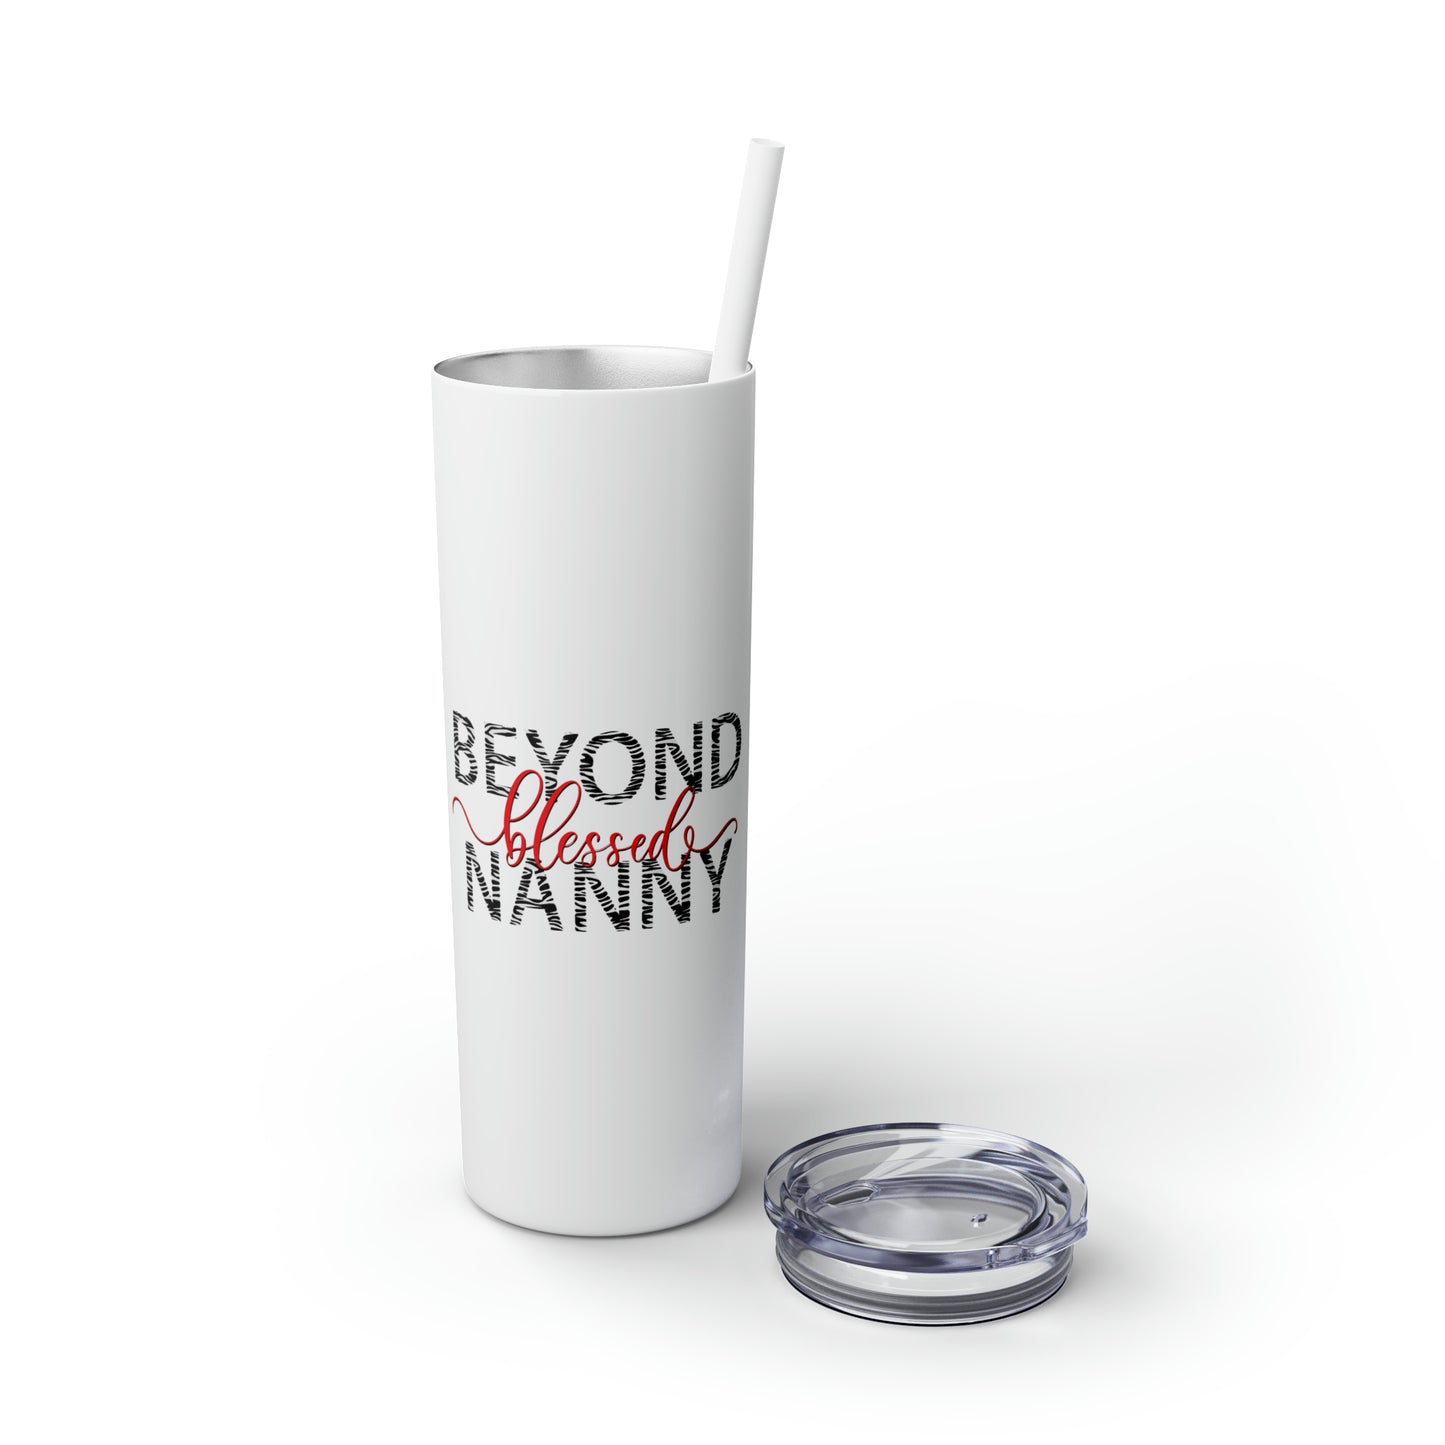 Beyond Blessed Nanny - Skinny Tumbler with Straw, 20oz